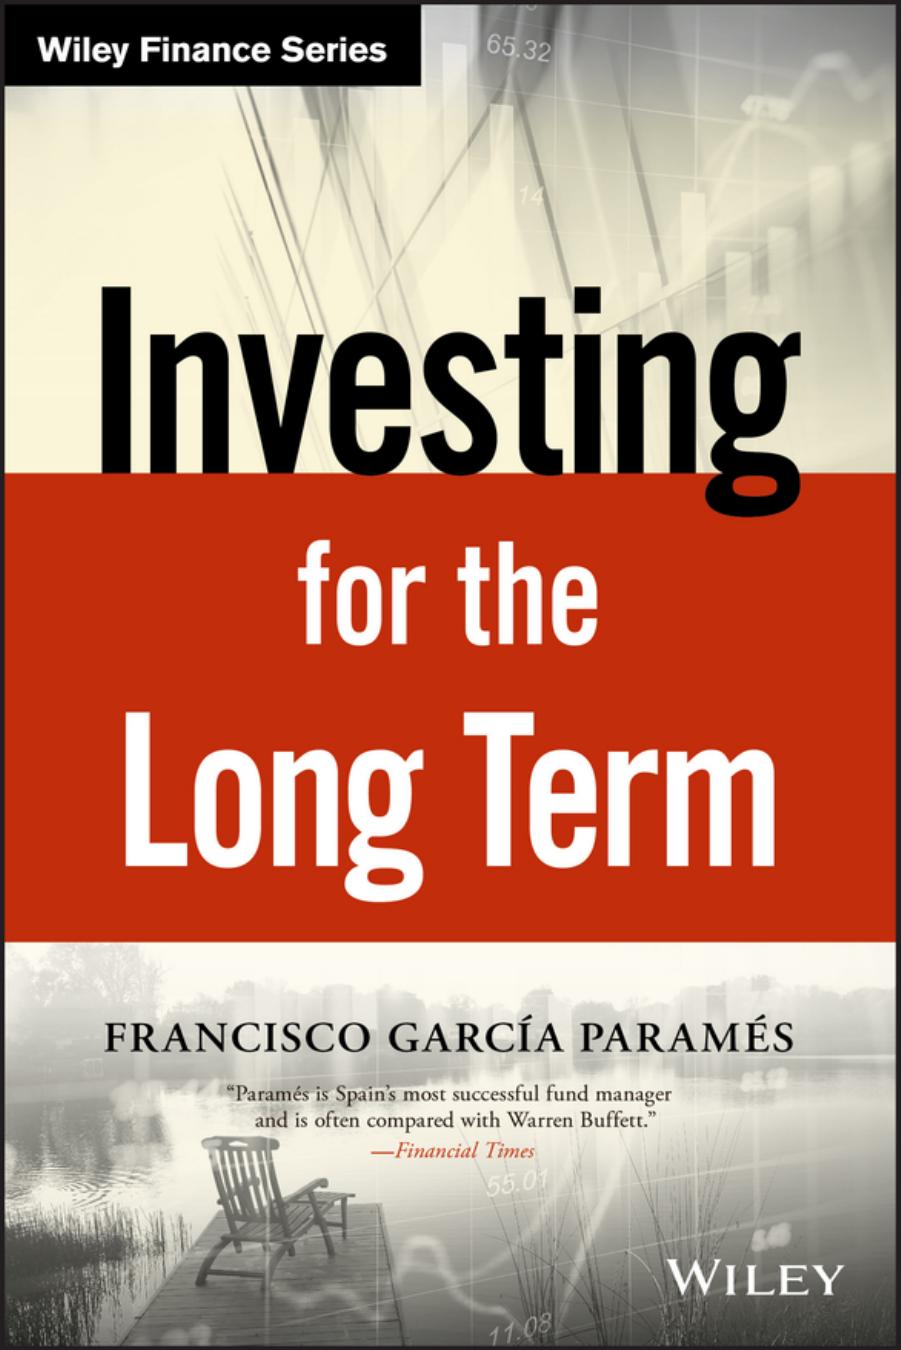 Investing for the Long Term.9781119431190 - Francisco Parames.jpg